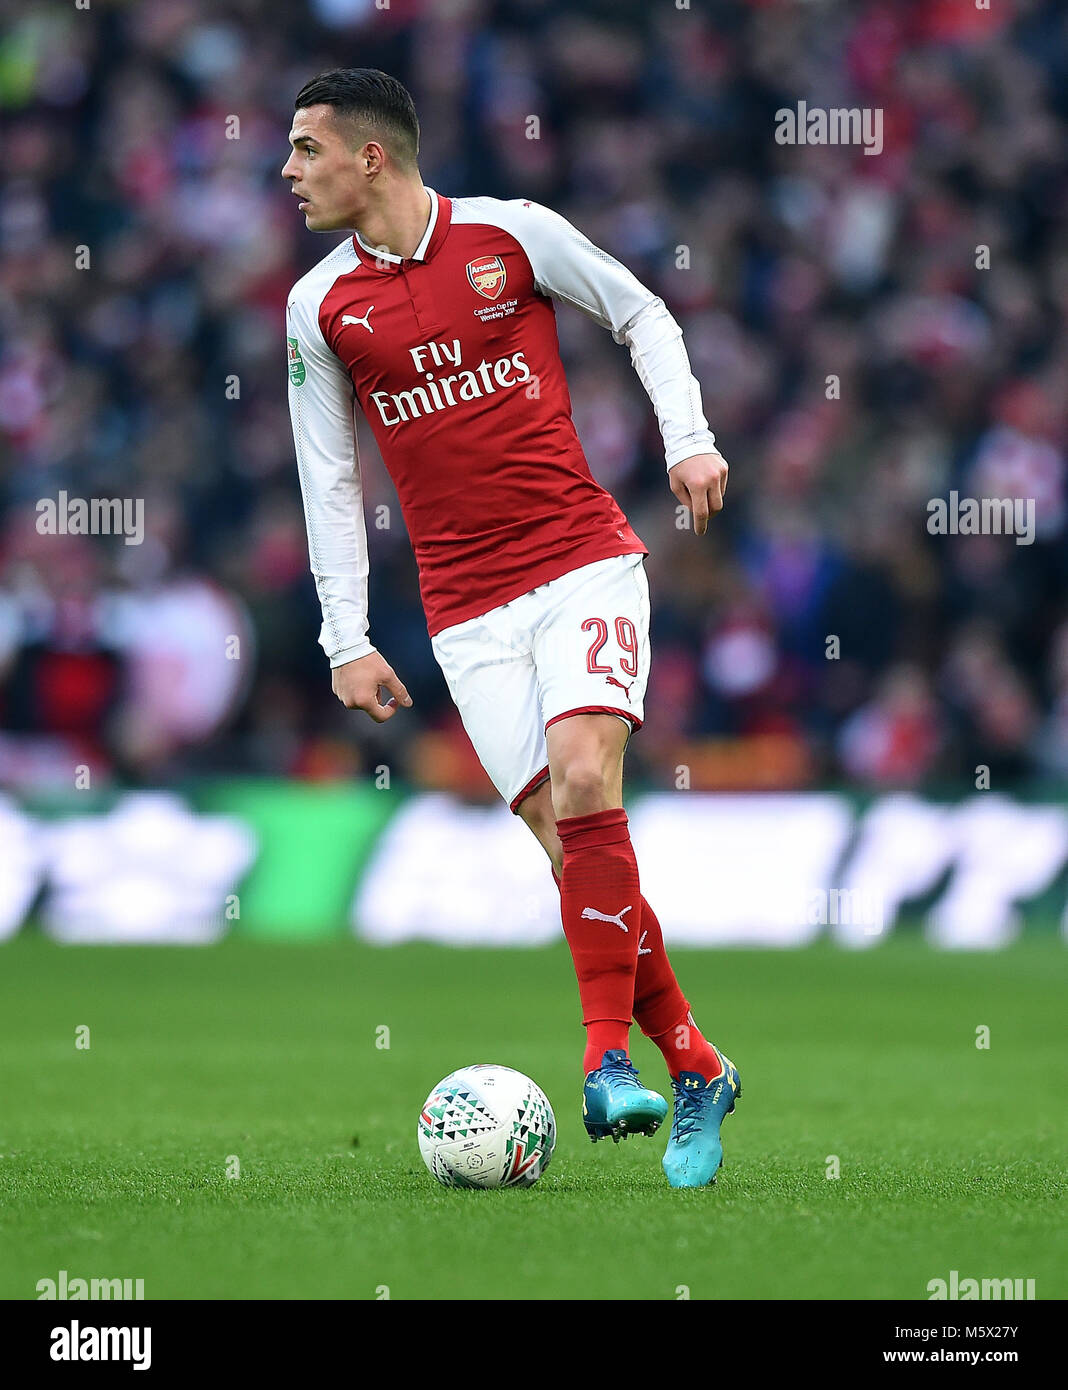 Granit Xhaka of Arsenal ARSENAL V MANCHESTER CITY ARSENAL V MANCHESTER CITY, EFL CUP FINAL 25 February 2018 GBB6805 EFL CUP FINAL 25/02/18 STRICTLY EDITORIAL USE ONLY. If The Player/Players Depicted In This Image Is/Are Playing For An English Club Or The England National Team. Then This Image May Only Be Used For Editorial Purposes. No Commercial Use. The Following Usages Are Also Restricted EVEN IF IN AN EDITORIAL CONTEXT: Use in conjuction with, or part of, any unauthorized audio, video, data, fixture lists, club/league logos, Betting, Games or any 'live' services. Also R Stock Photo